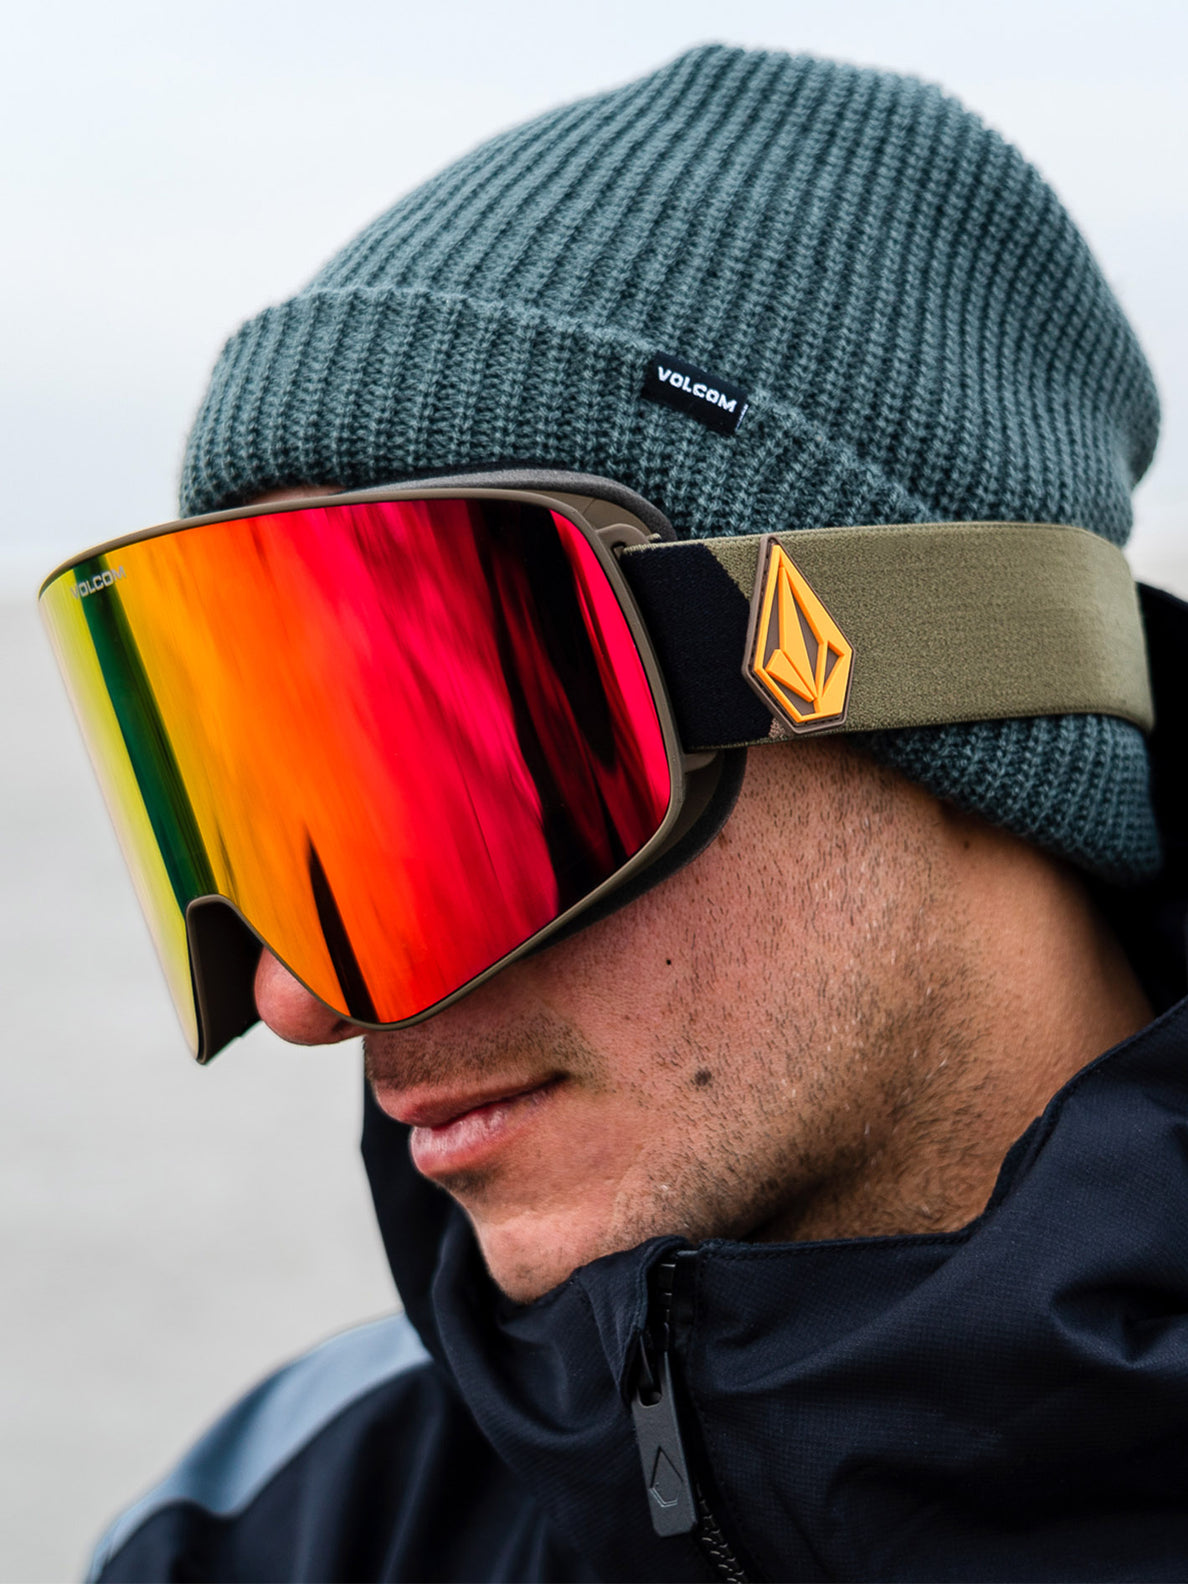 ODYSSEY GOGGLE – HOWL SUPPLY